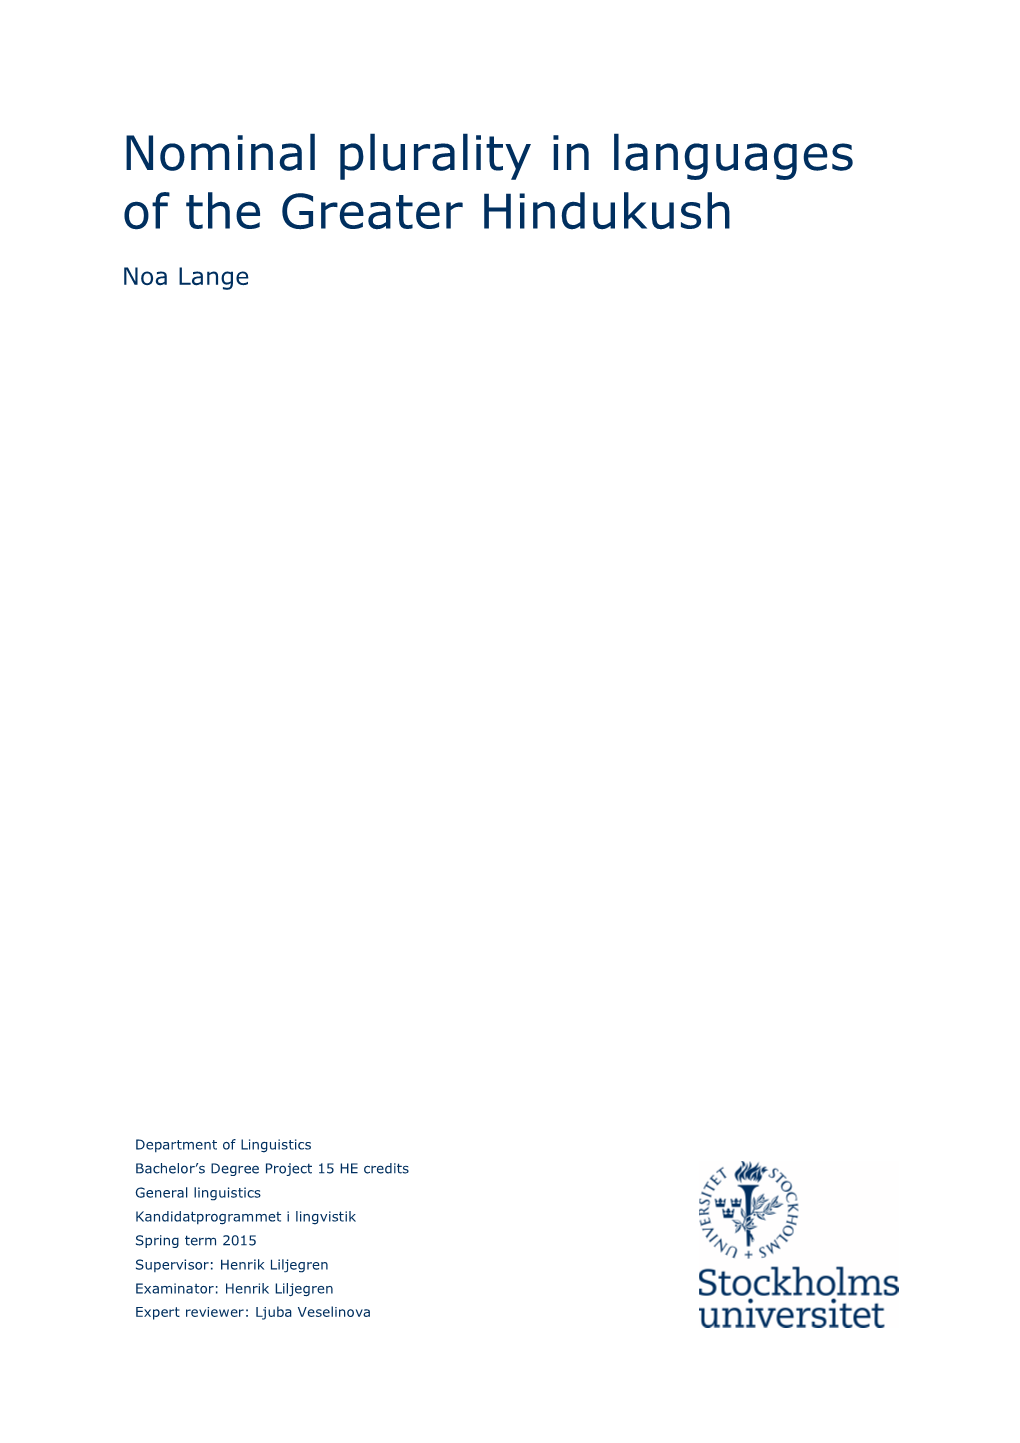 Nominal Plurality in Languages of the Greater Hindukush